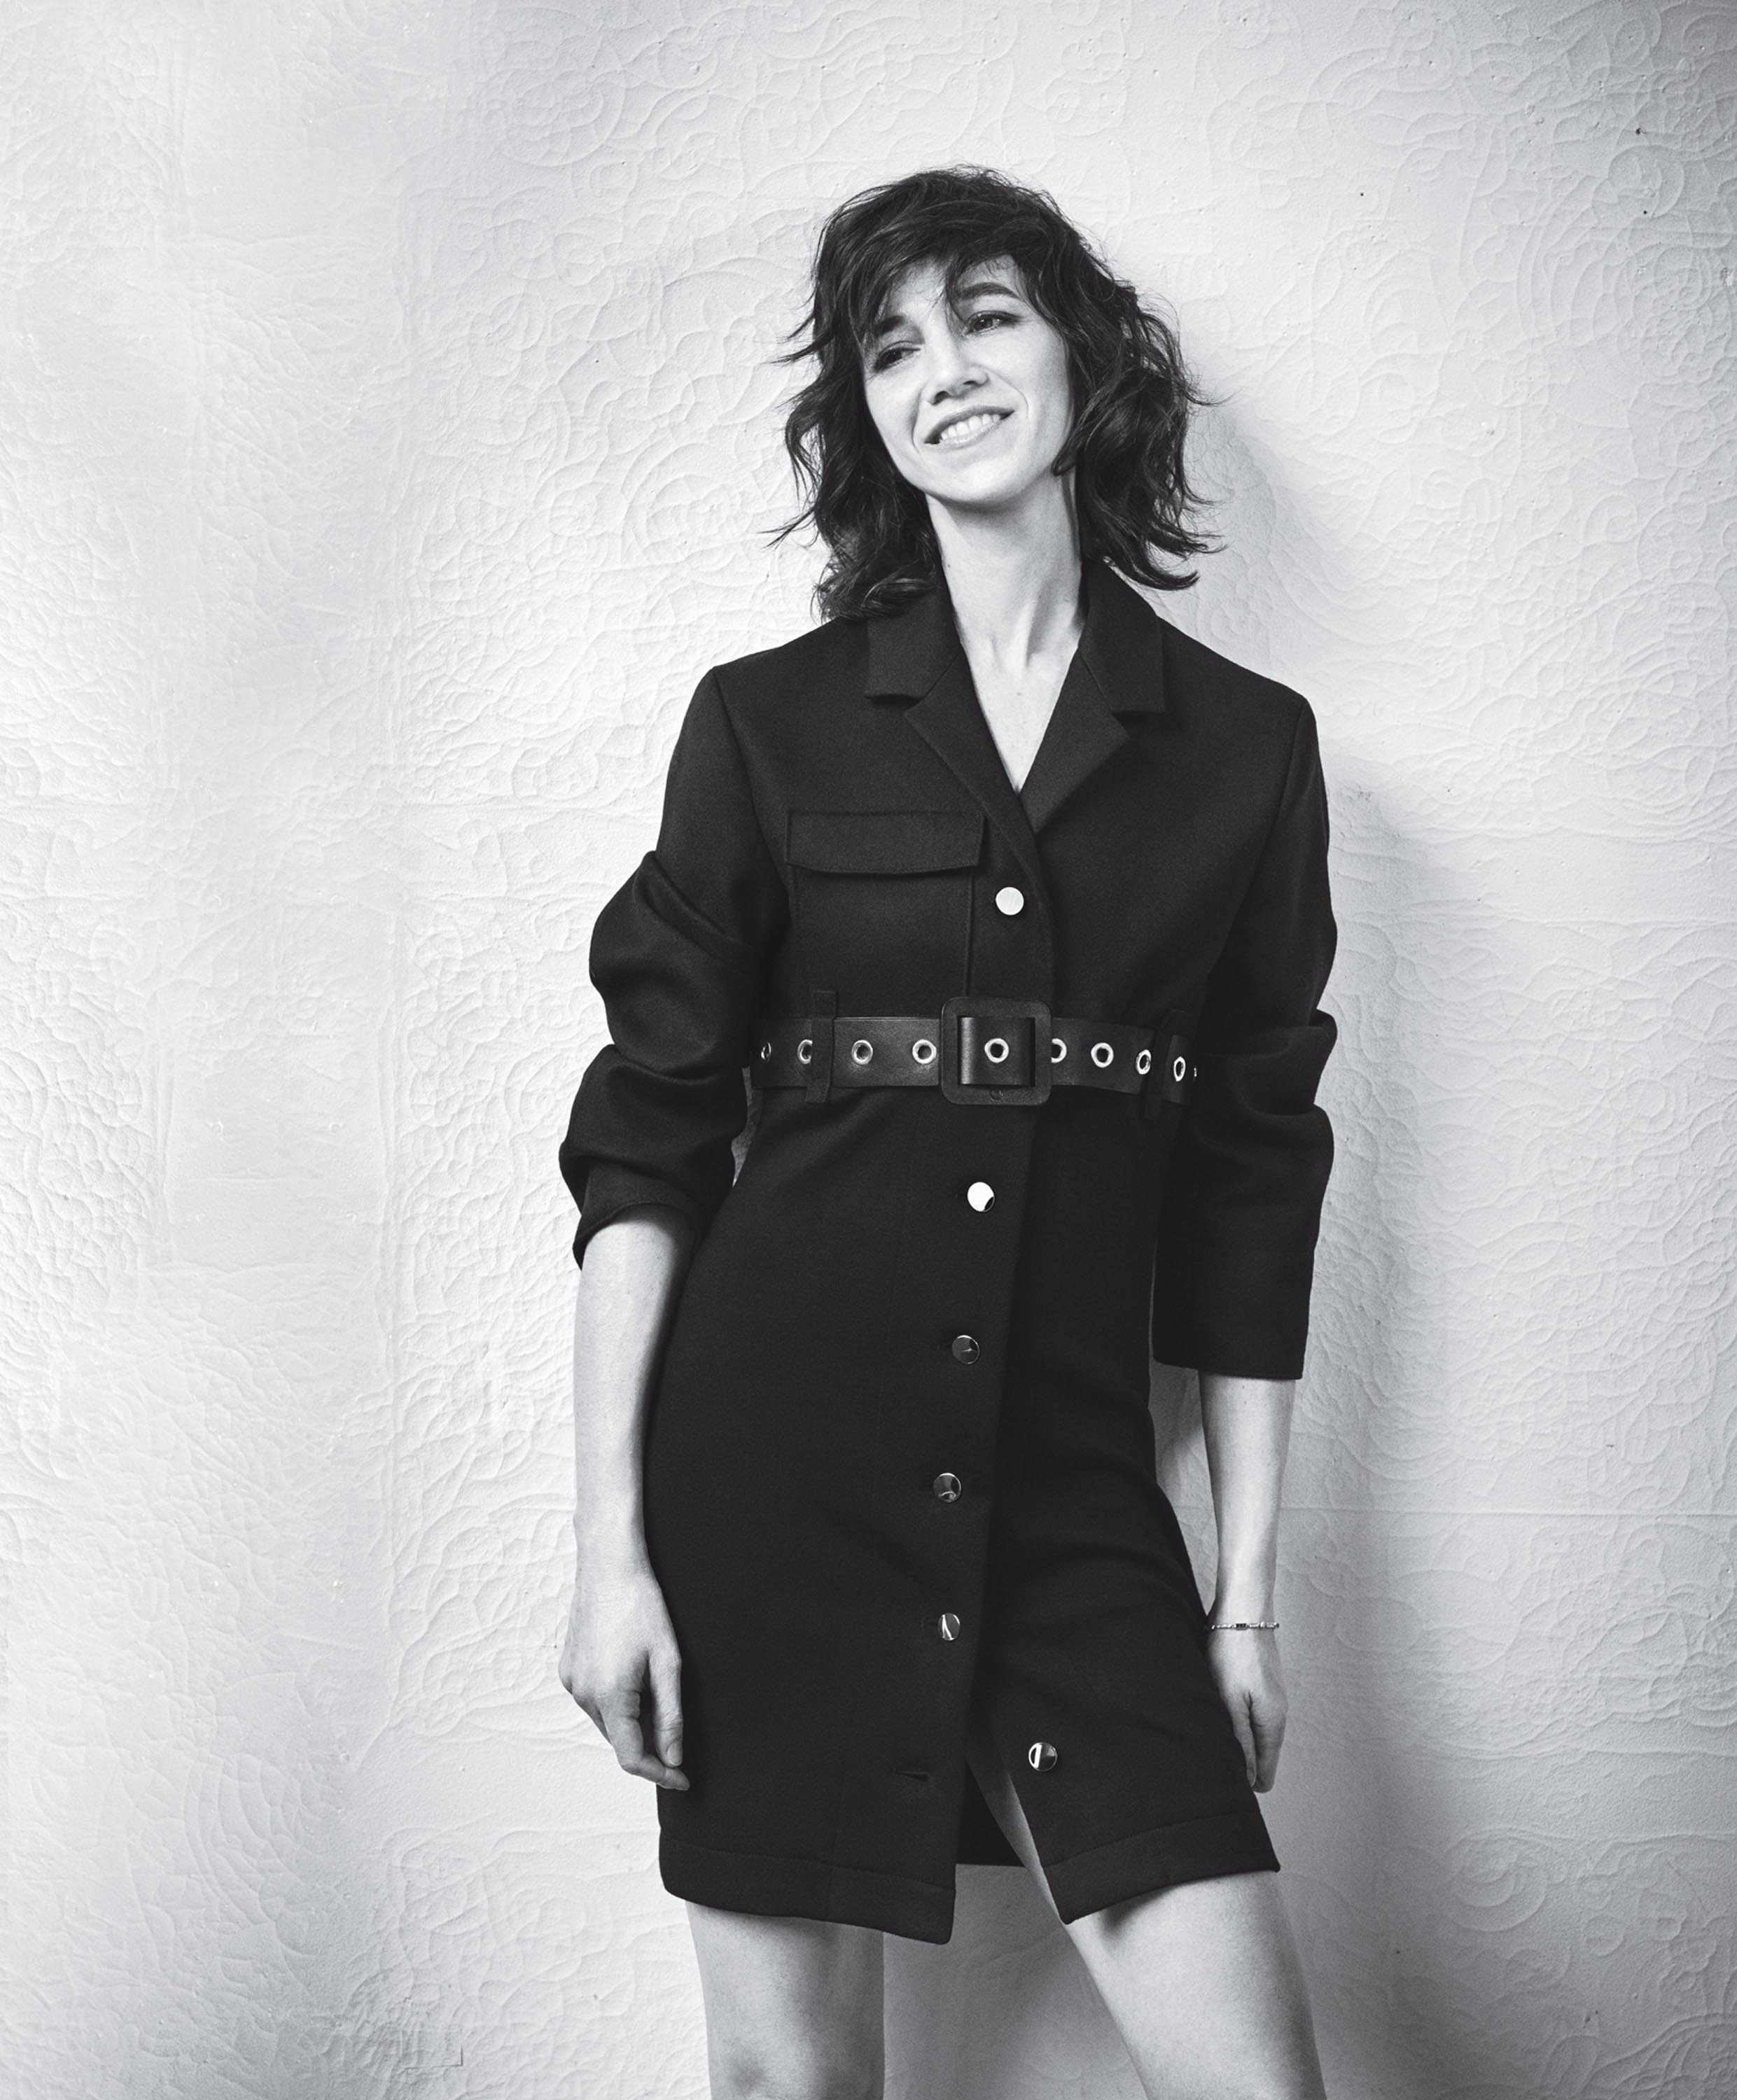 Charlotte Gainsbourg photoshoot for InStyle 2016